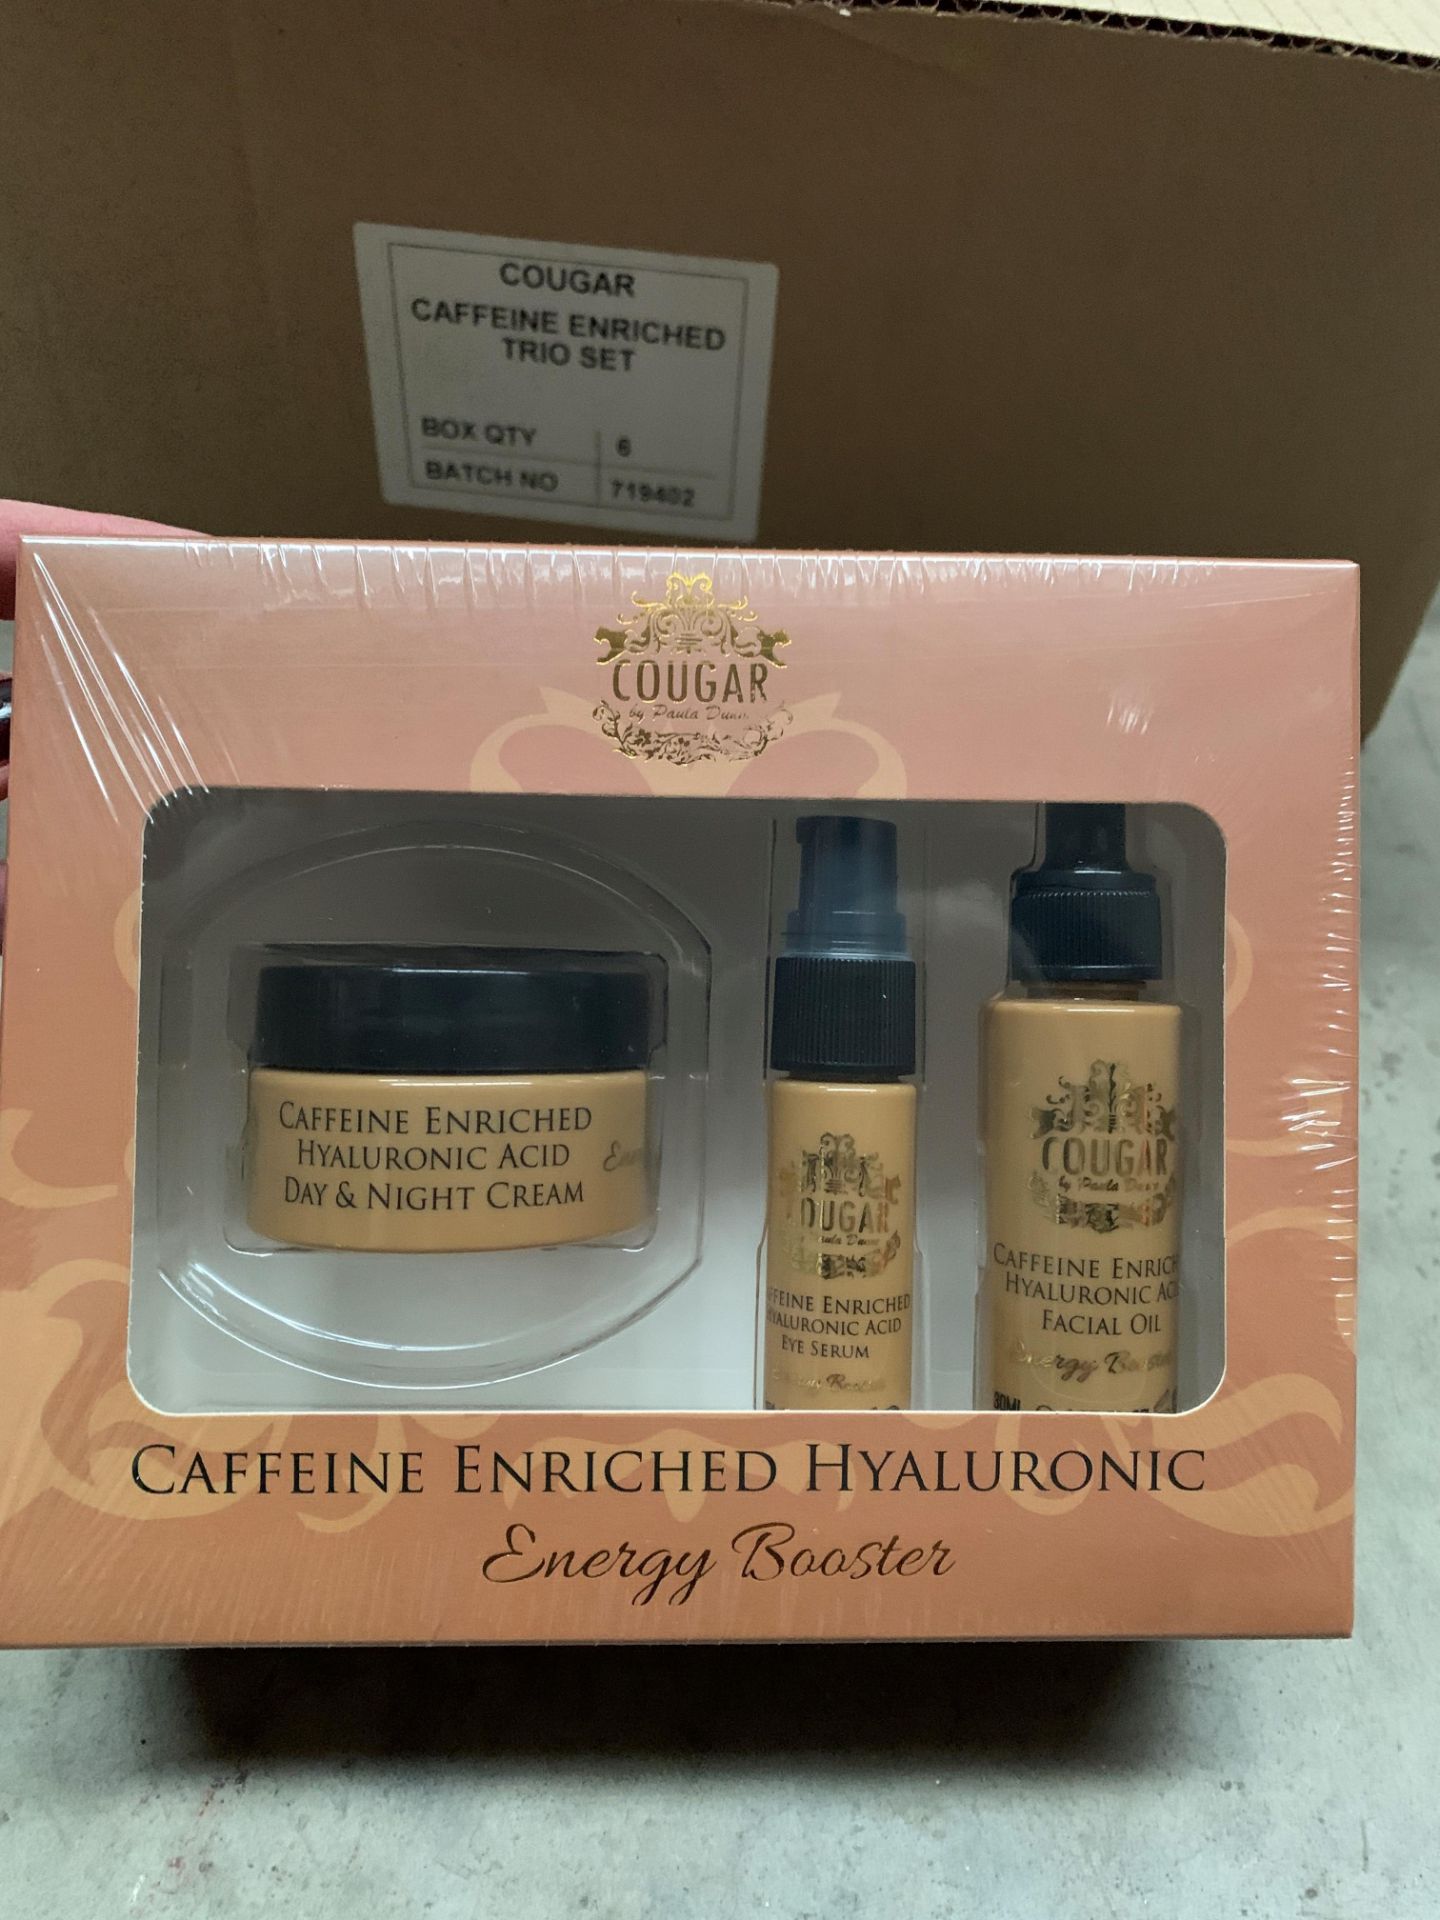 6 x Cougar Caffeine Enriched Hyaluronic Energy Booster packs, each containing facial oil 30ml,